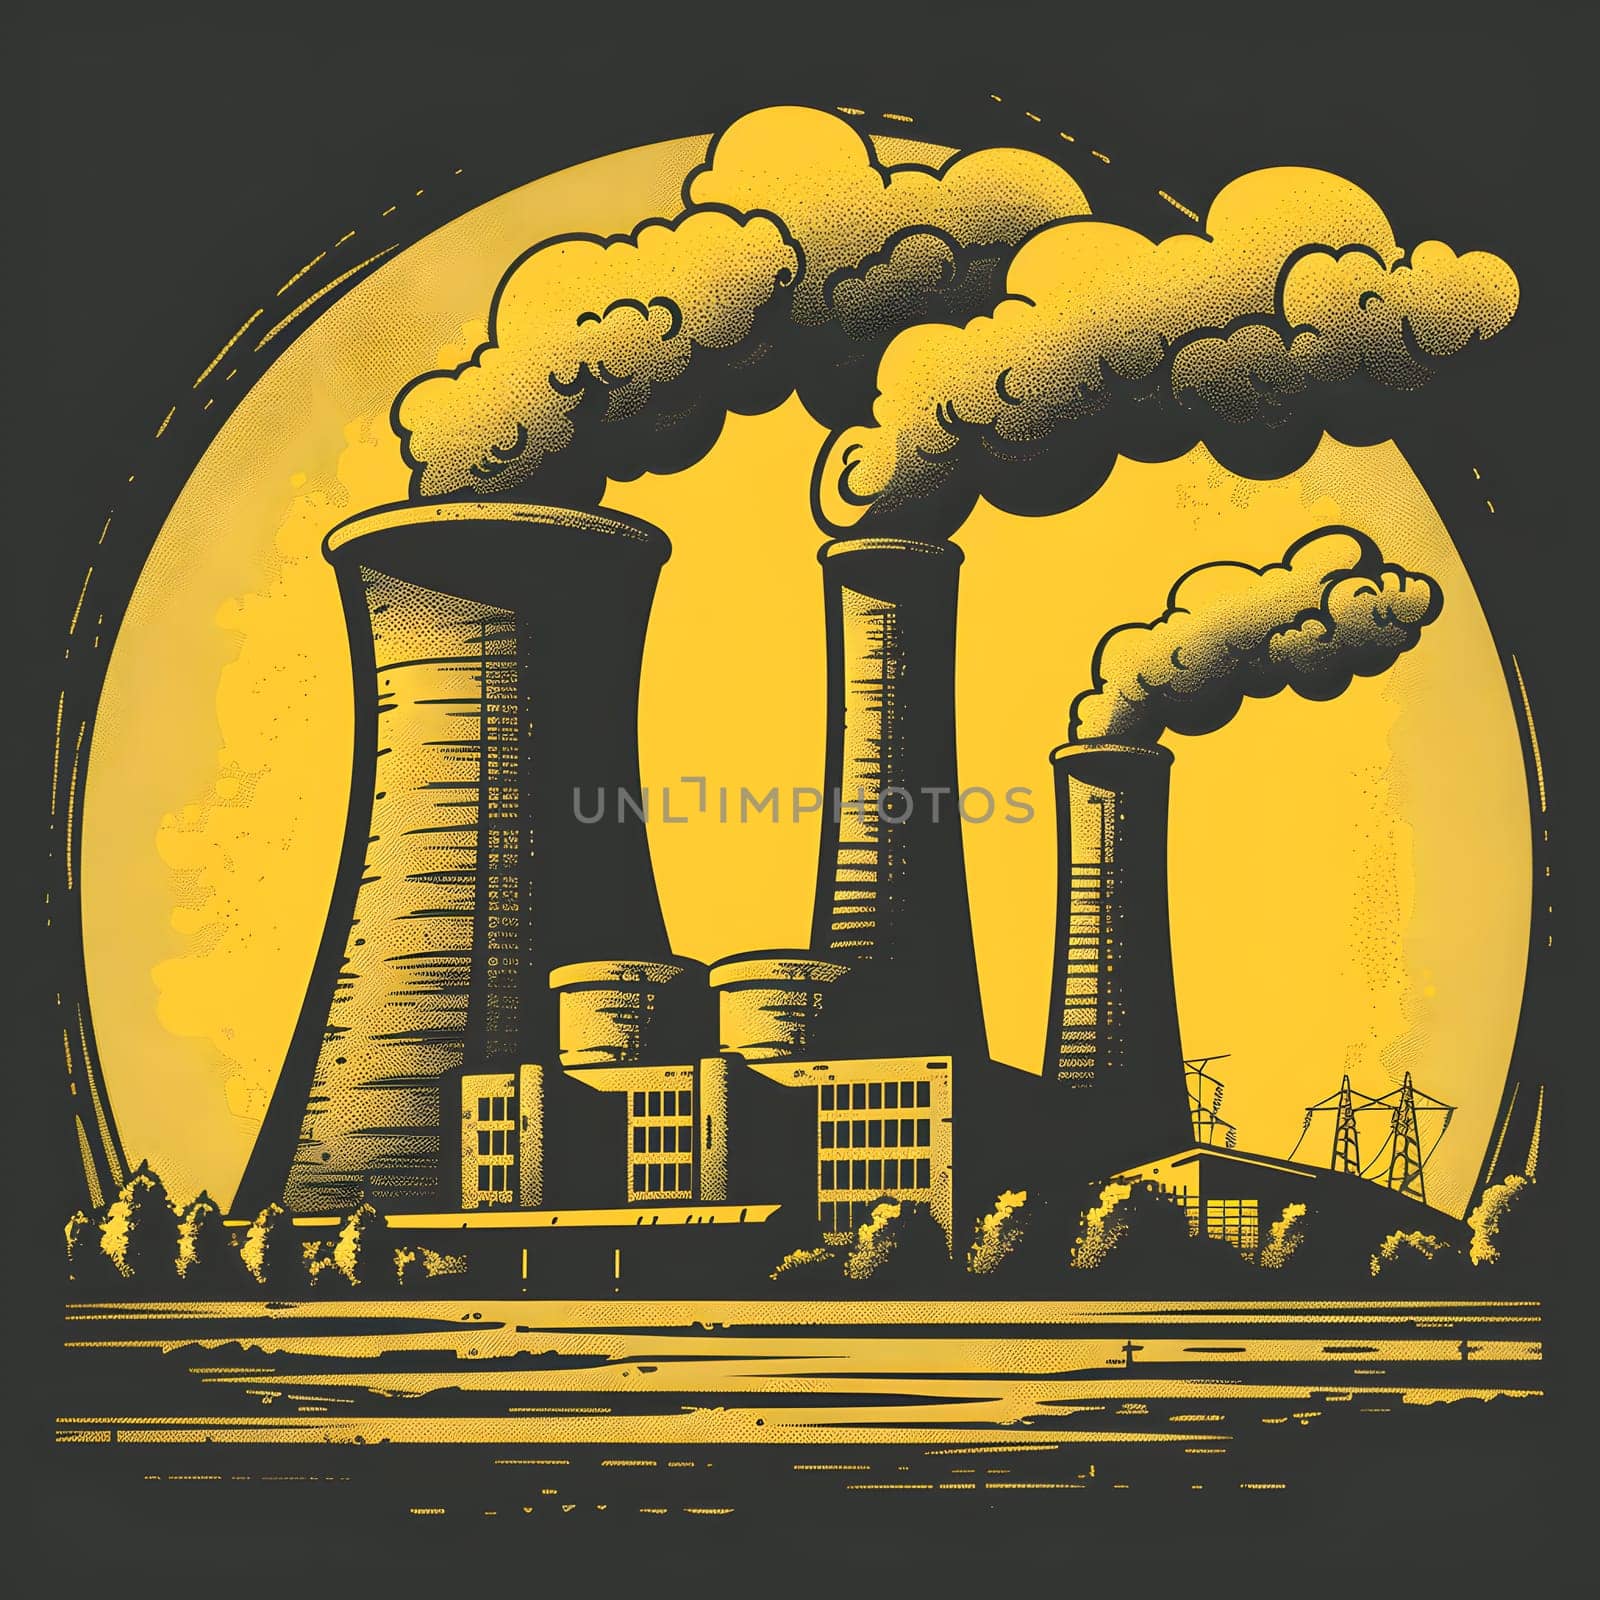 An art piece showing a black and yellow illustration of a nuclear power plant in a rectangular picture frame, with shades and tints creating a striking visual effect